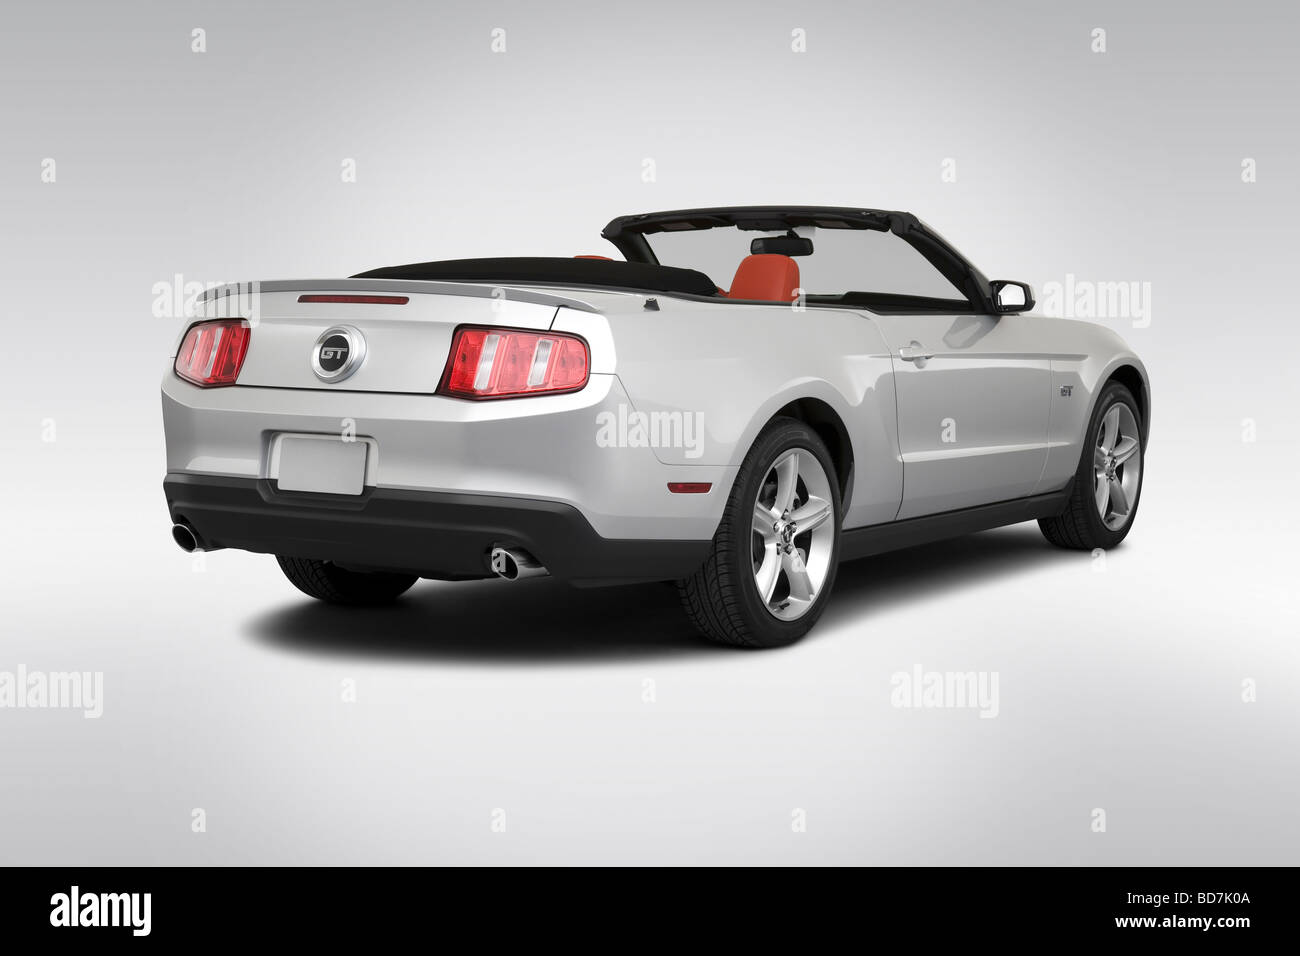 2010 Ford Mustang GT in Silver - Rear angle view Stock Photo